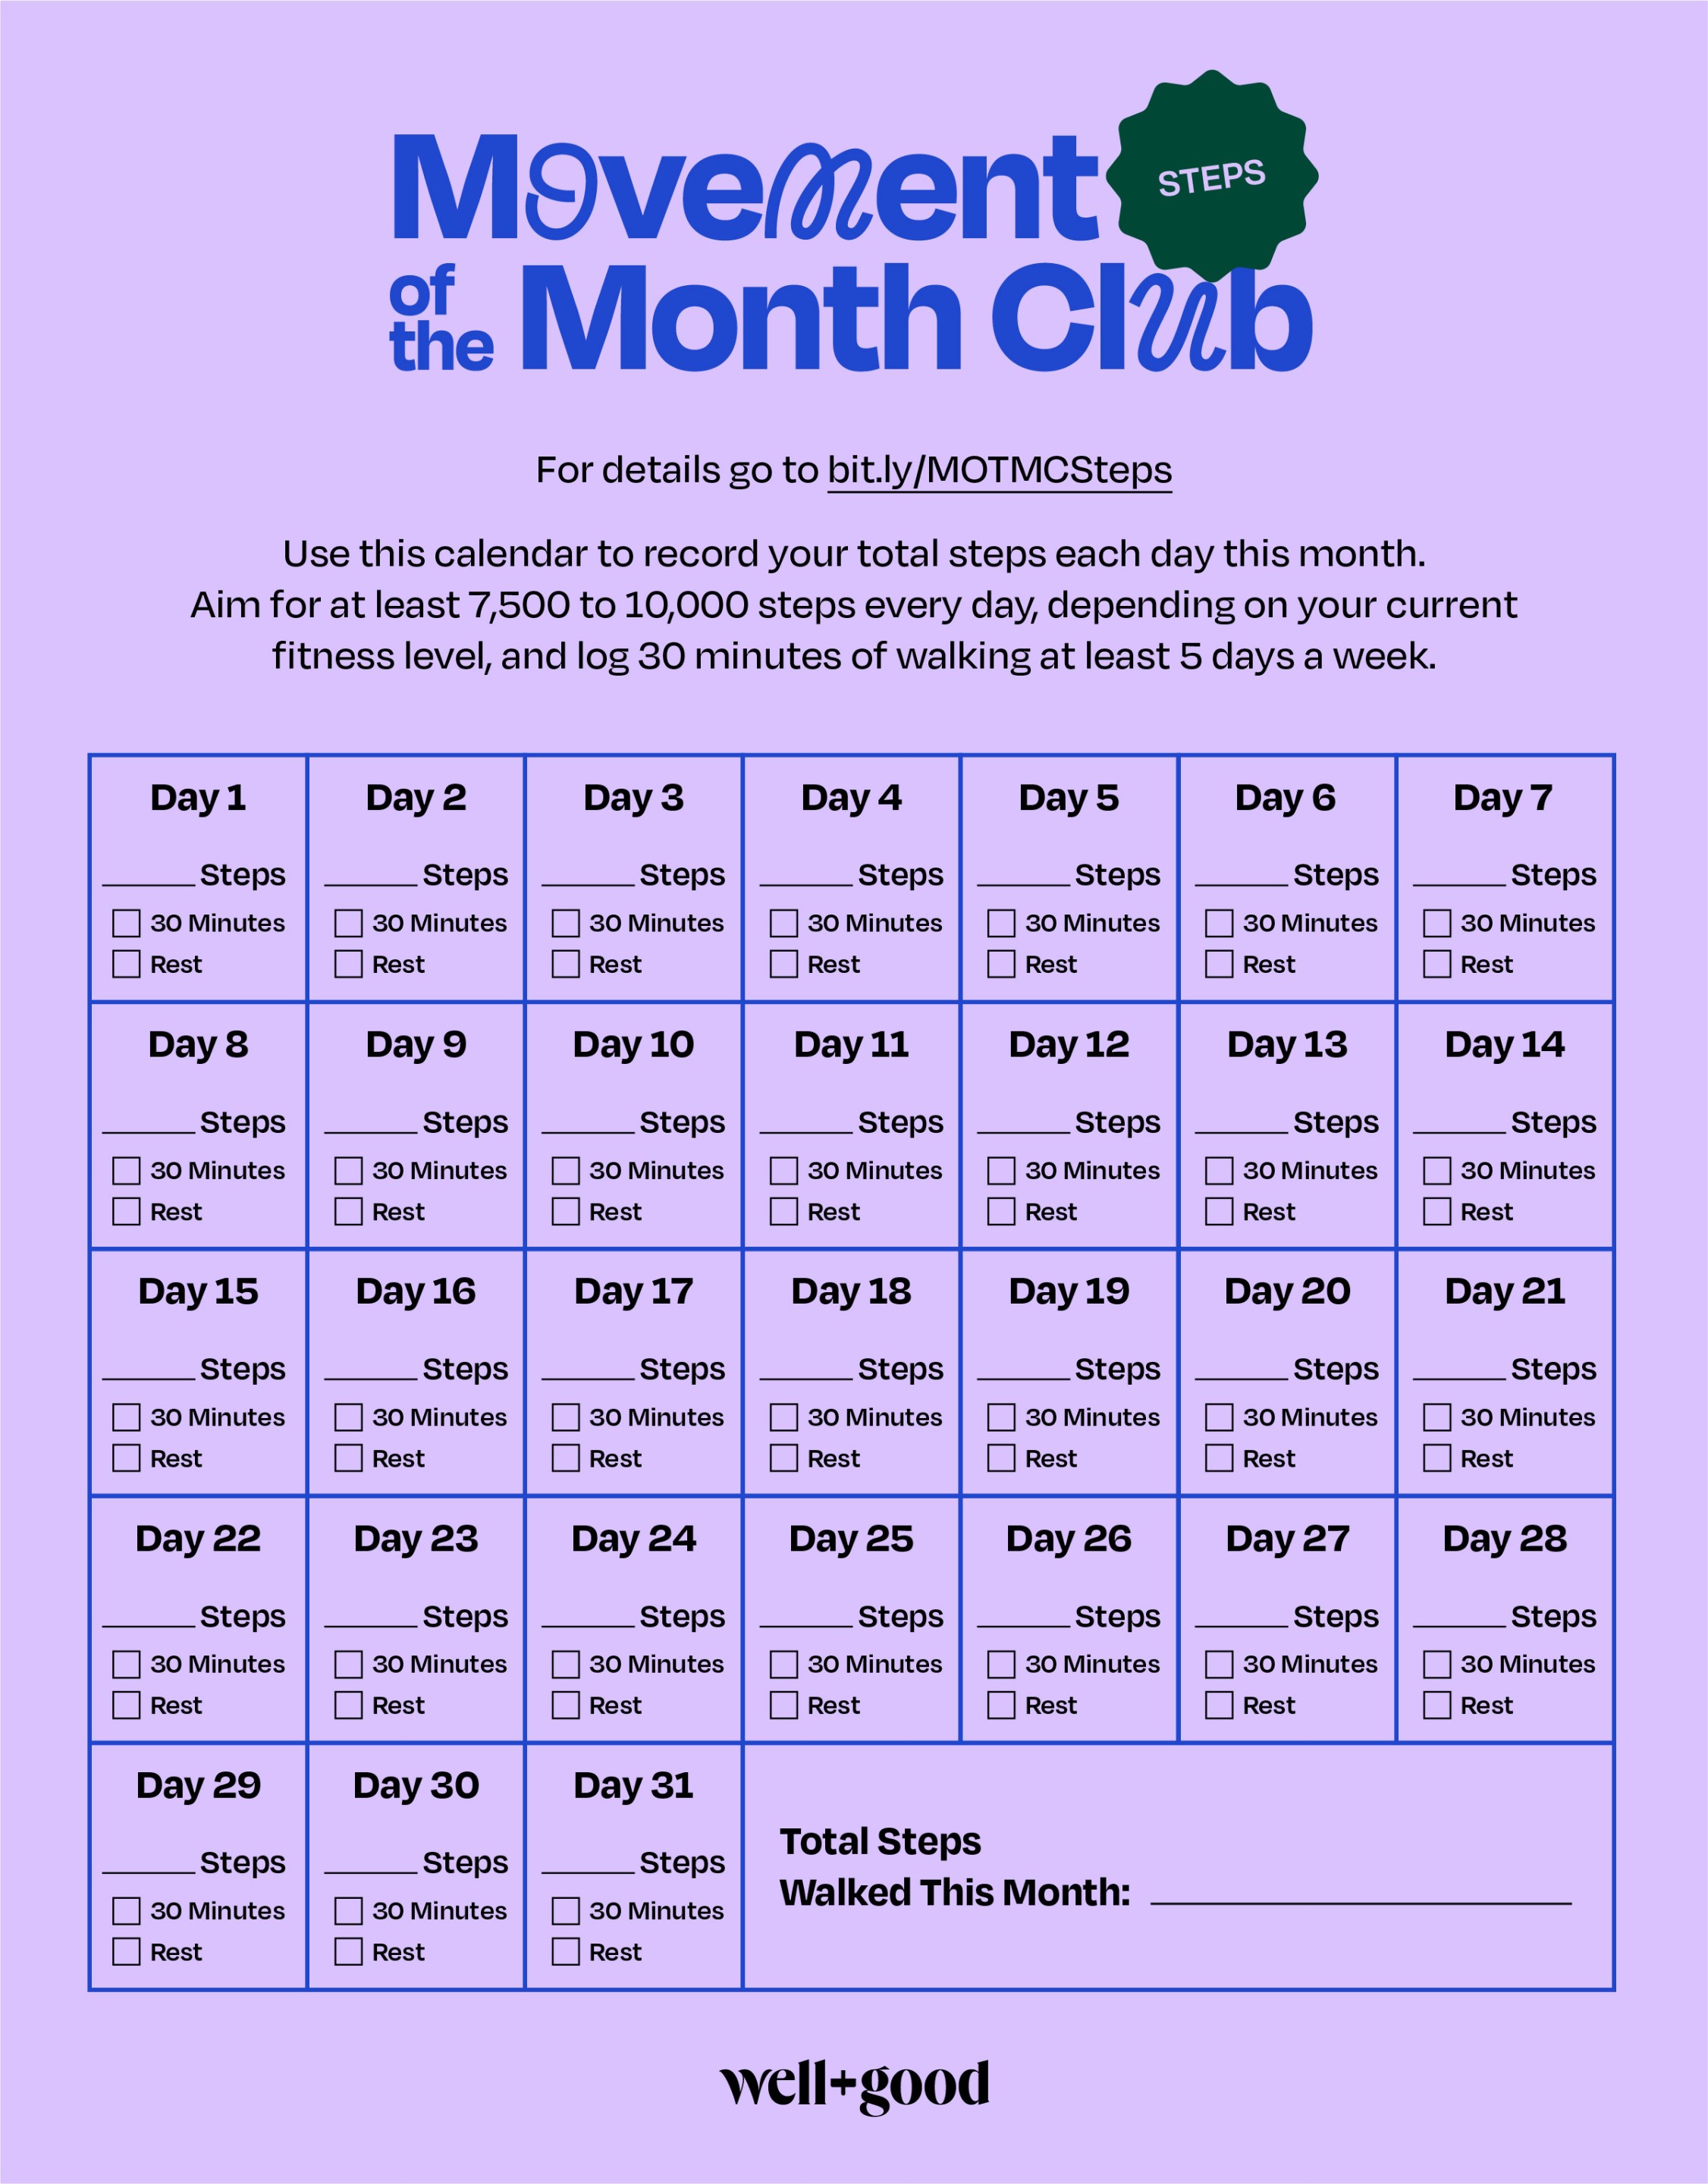 a calendar for Well+Good's Movement of the Month Club step challenge, with spots to check off how many steps you've gotten a day